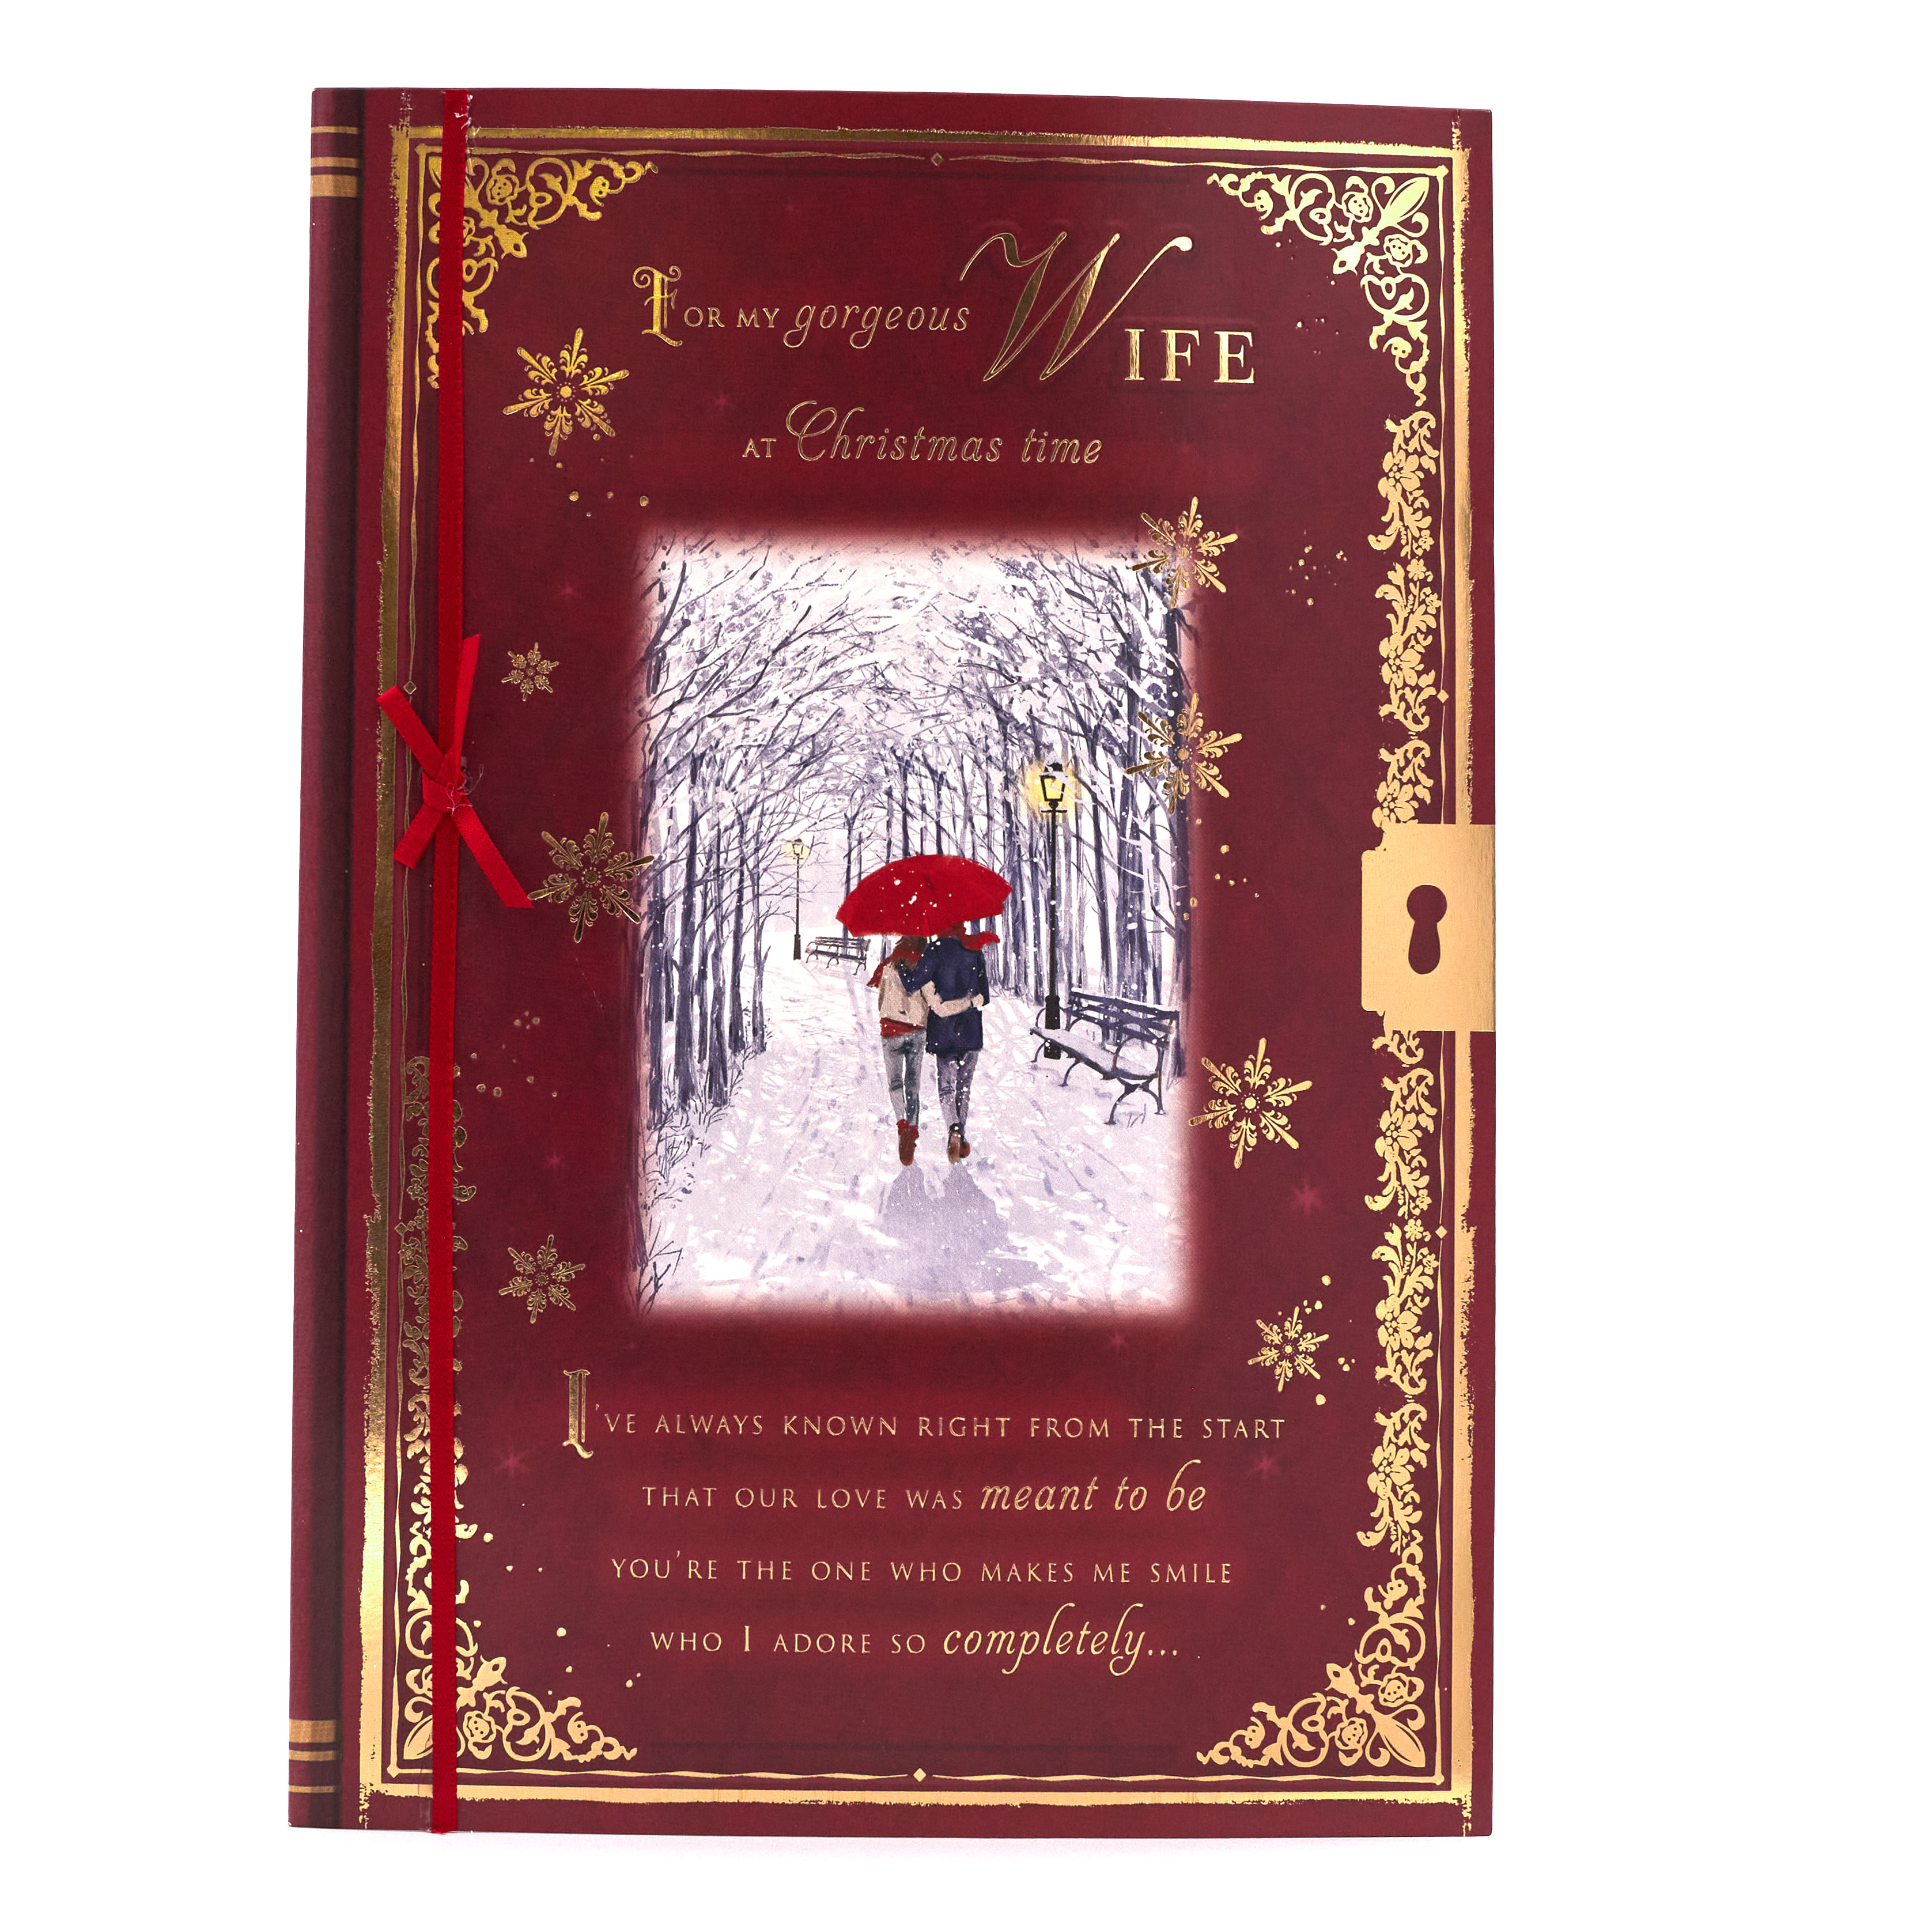 Christmas Card - Gorgeous Wife, Traditional Christmas Verse